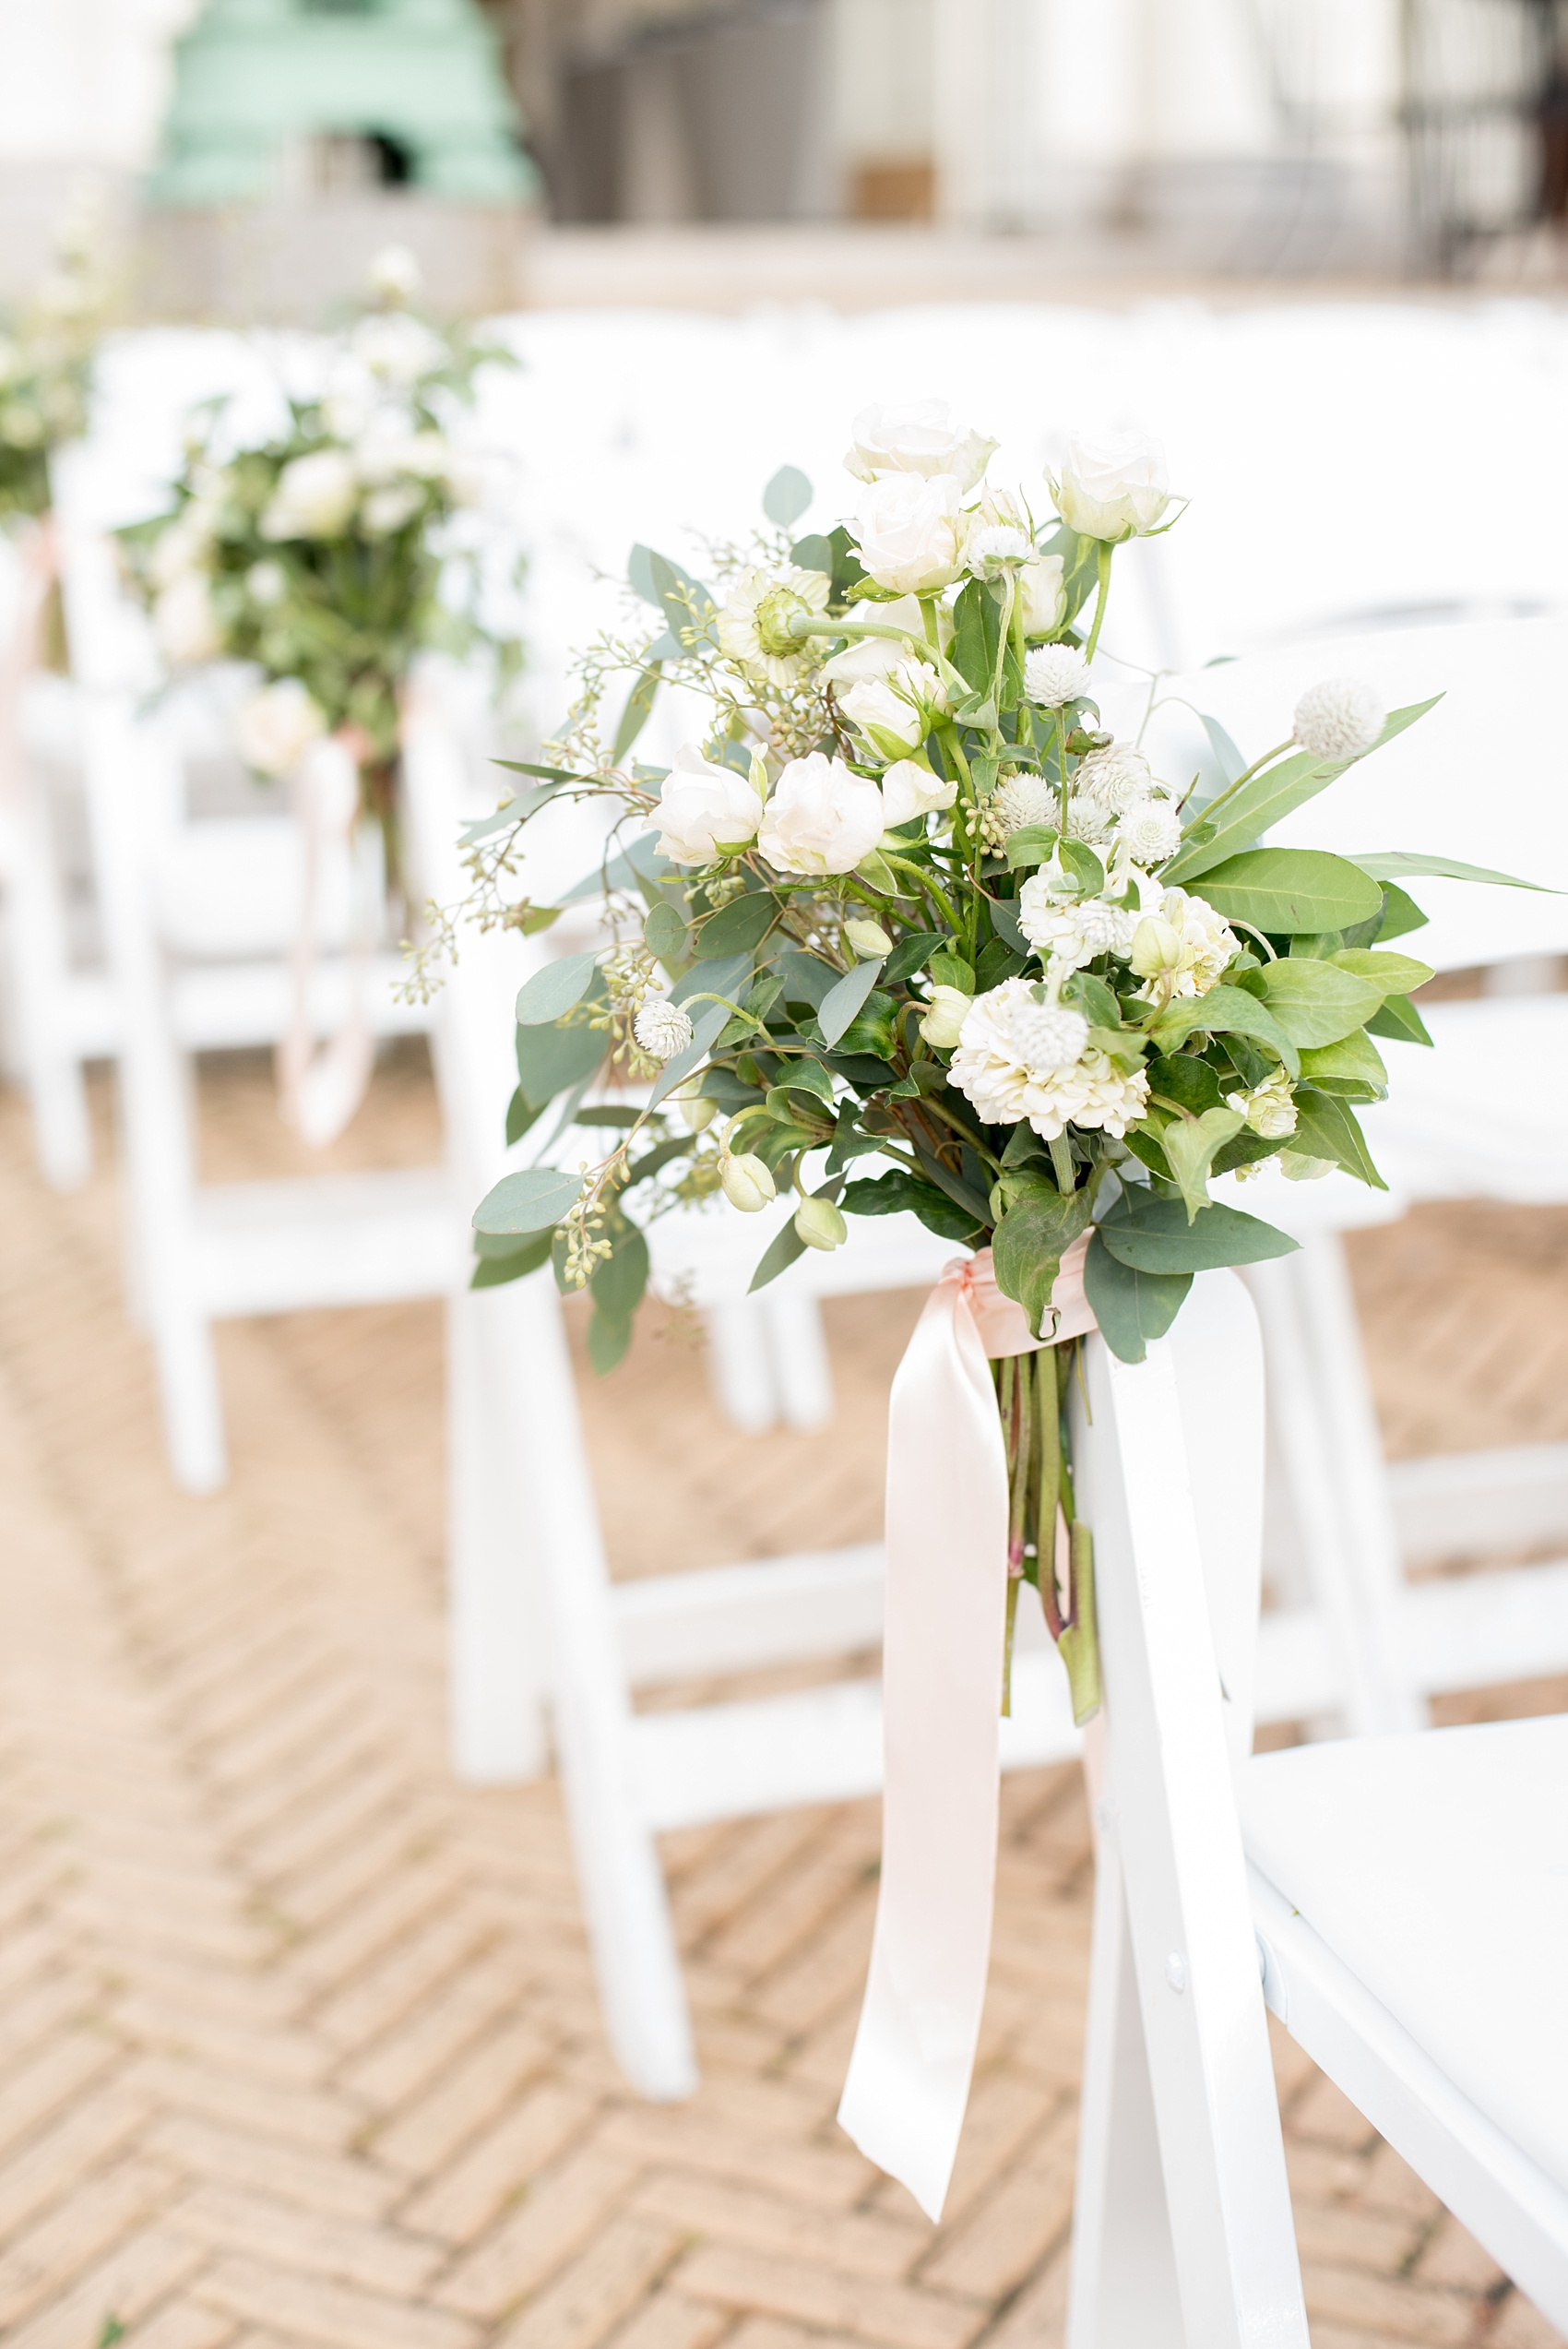 Mikkel Paige Photography photo of an outdoor ceremony floral piece at a Prospect Park Boathouse wedding.